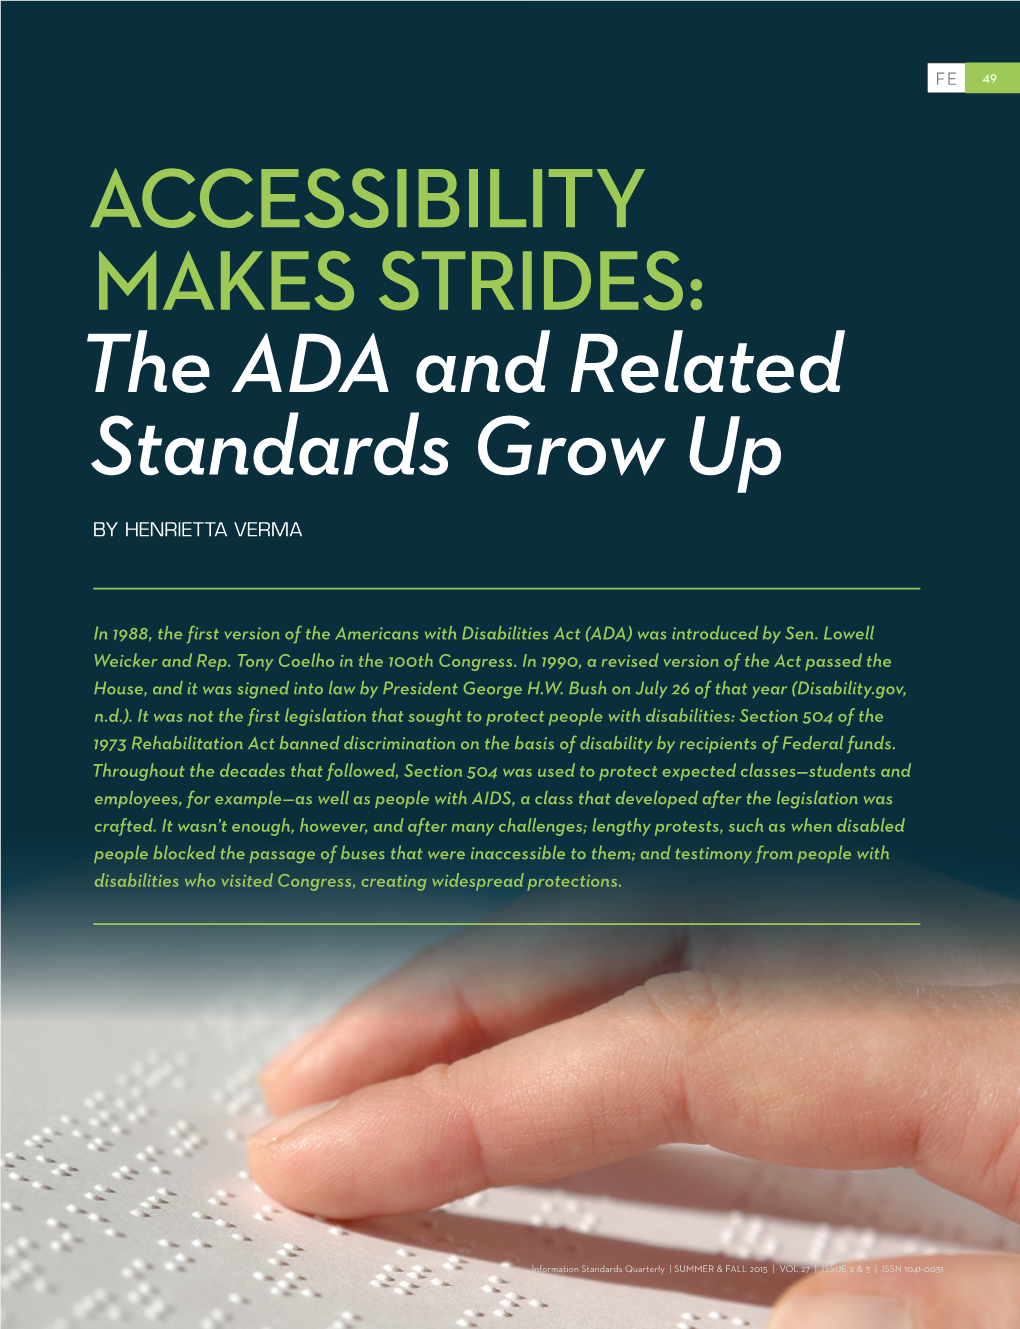 ACCESSIBILITY MAKES STRIDES: the ADA and Related Standards Grow Up